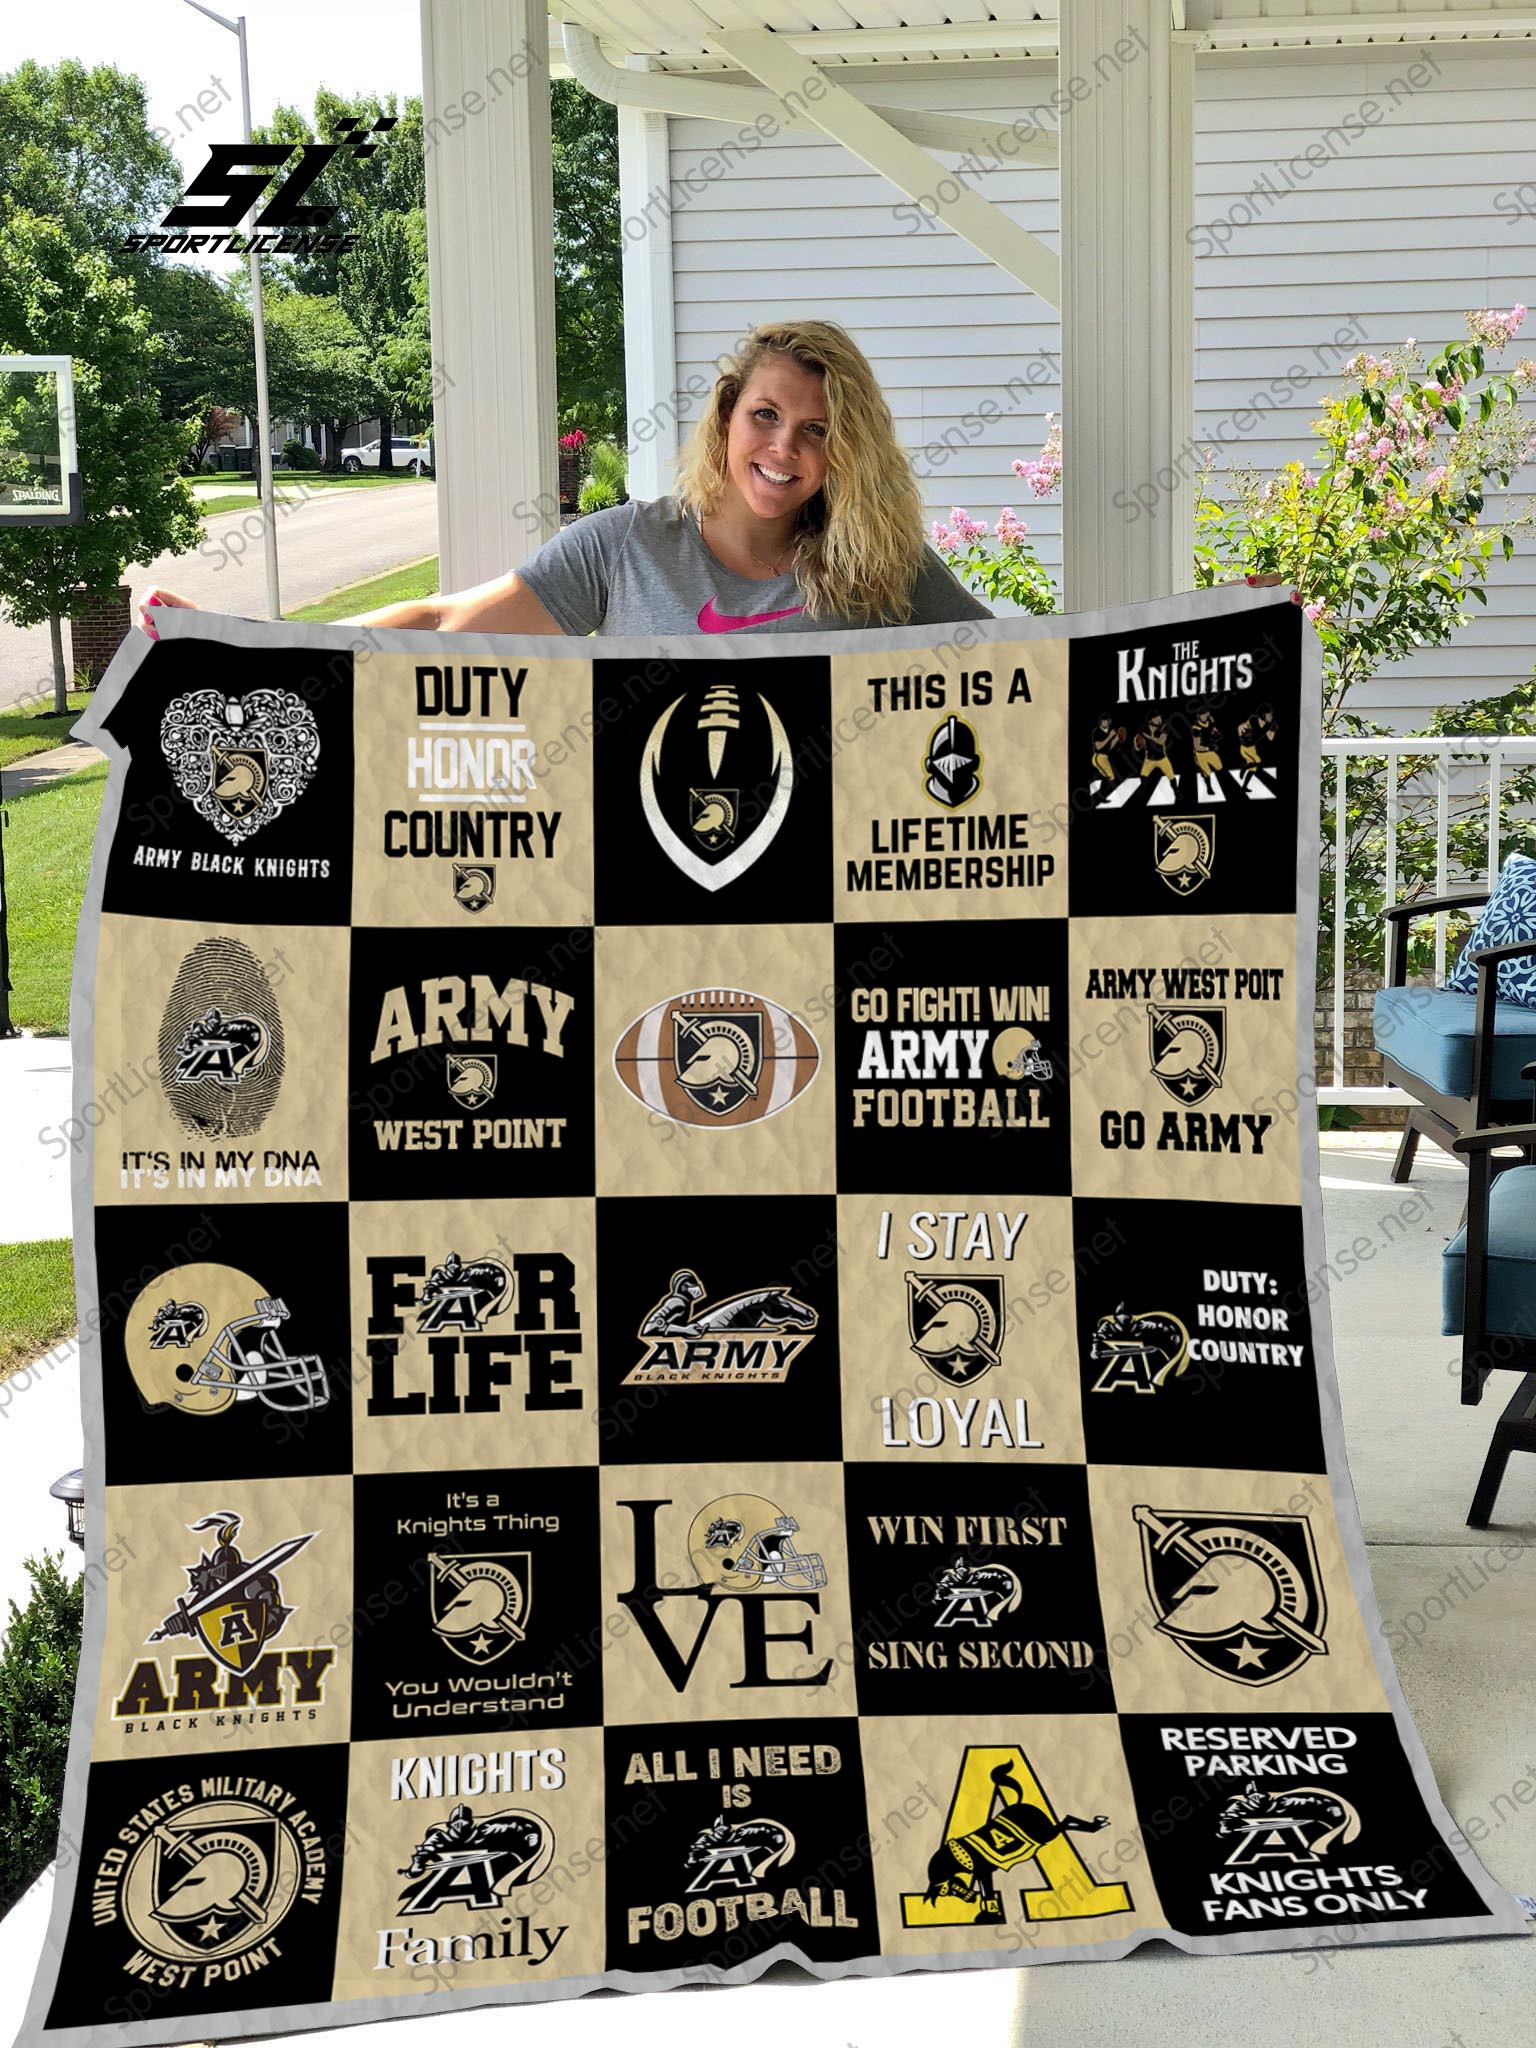 Army west point black knights quilt 1